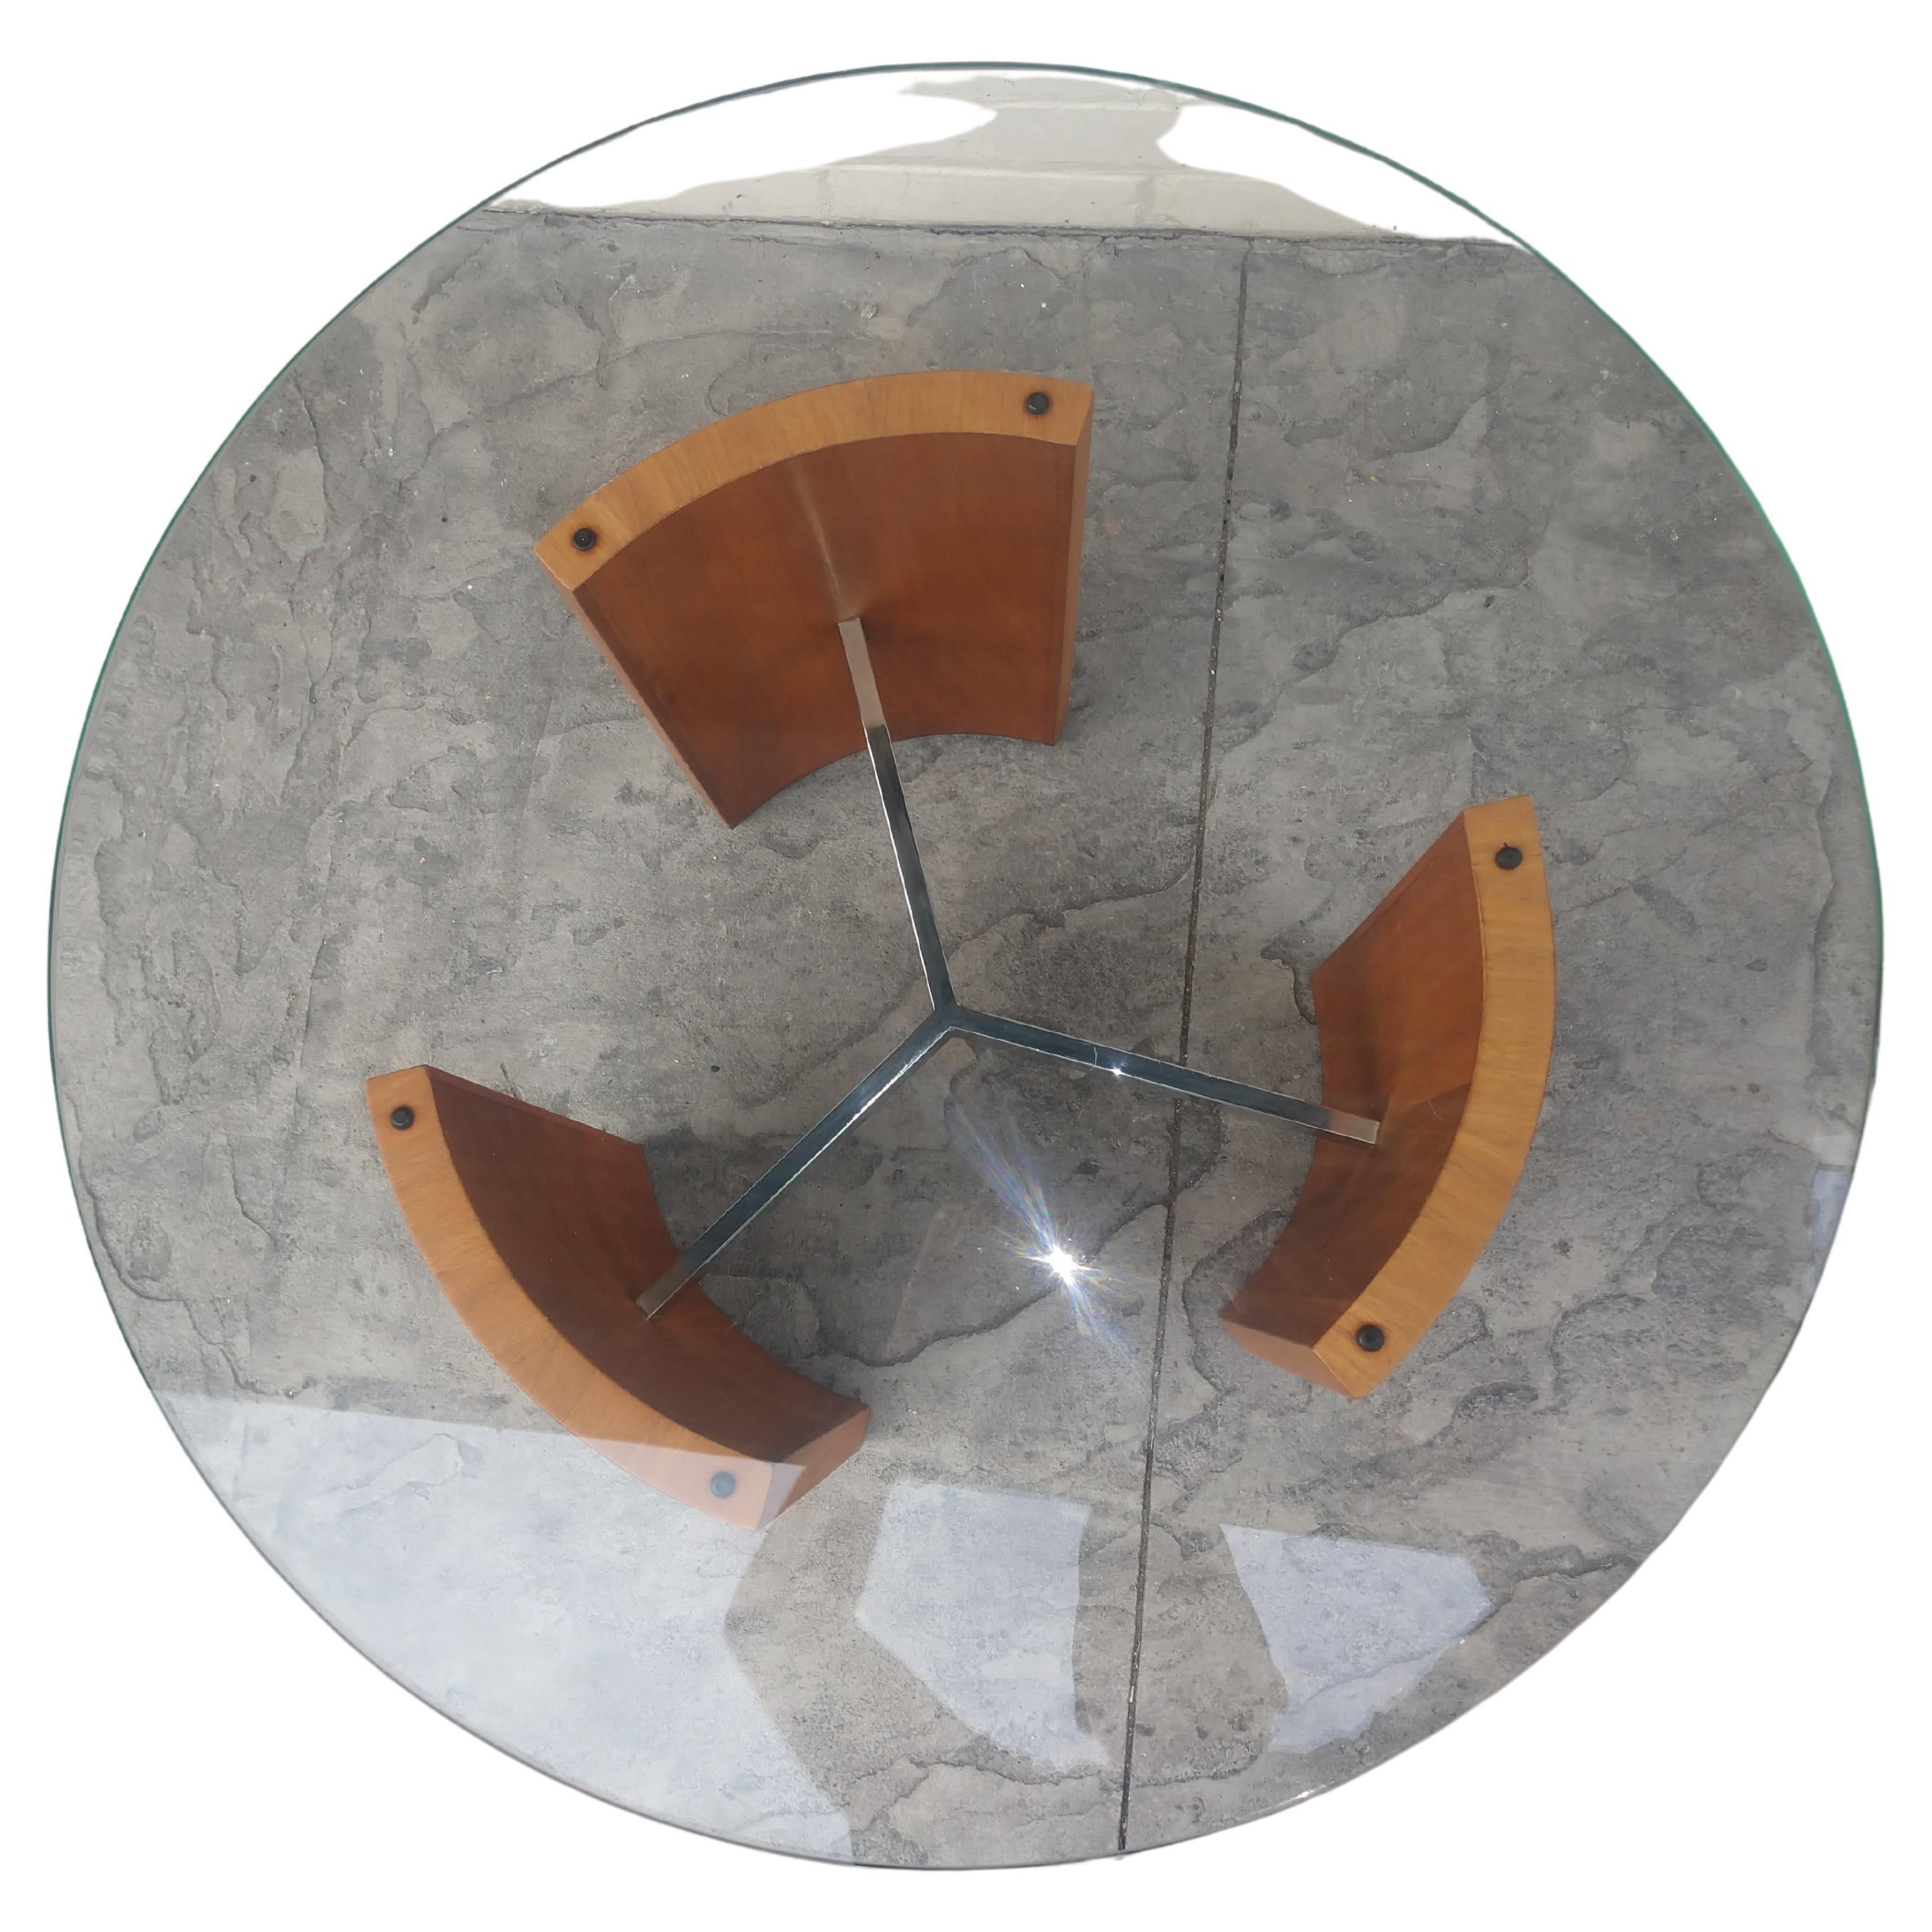 Exceptional and a beautiful table designed by Vladimir Kagan. Created from curved walnut panels connected by a polished chrome tri-star designed spoke. Glass is flawless.